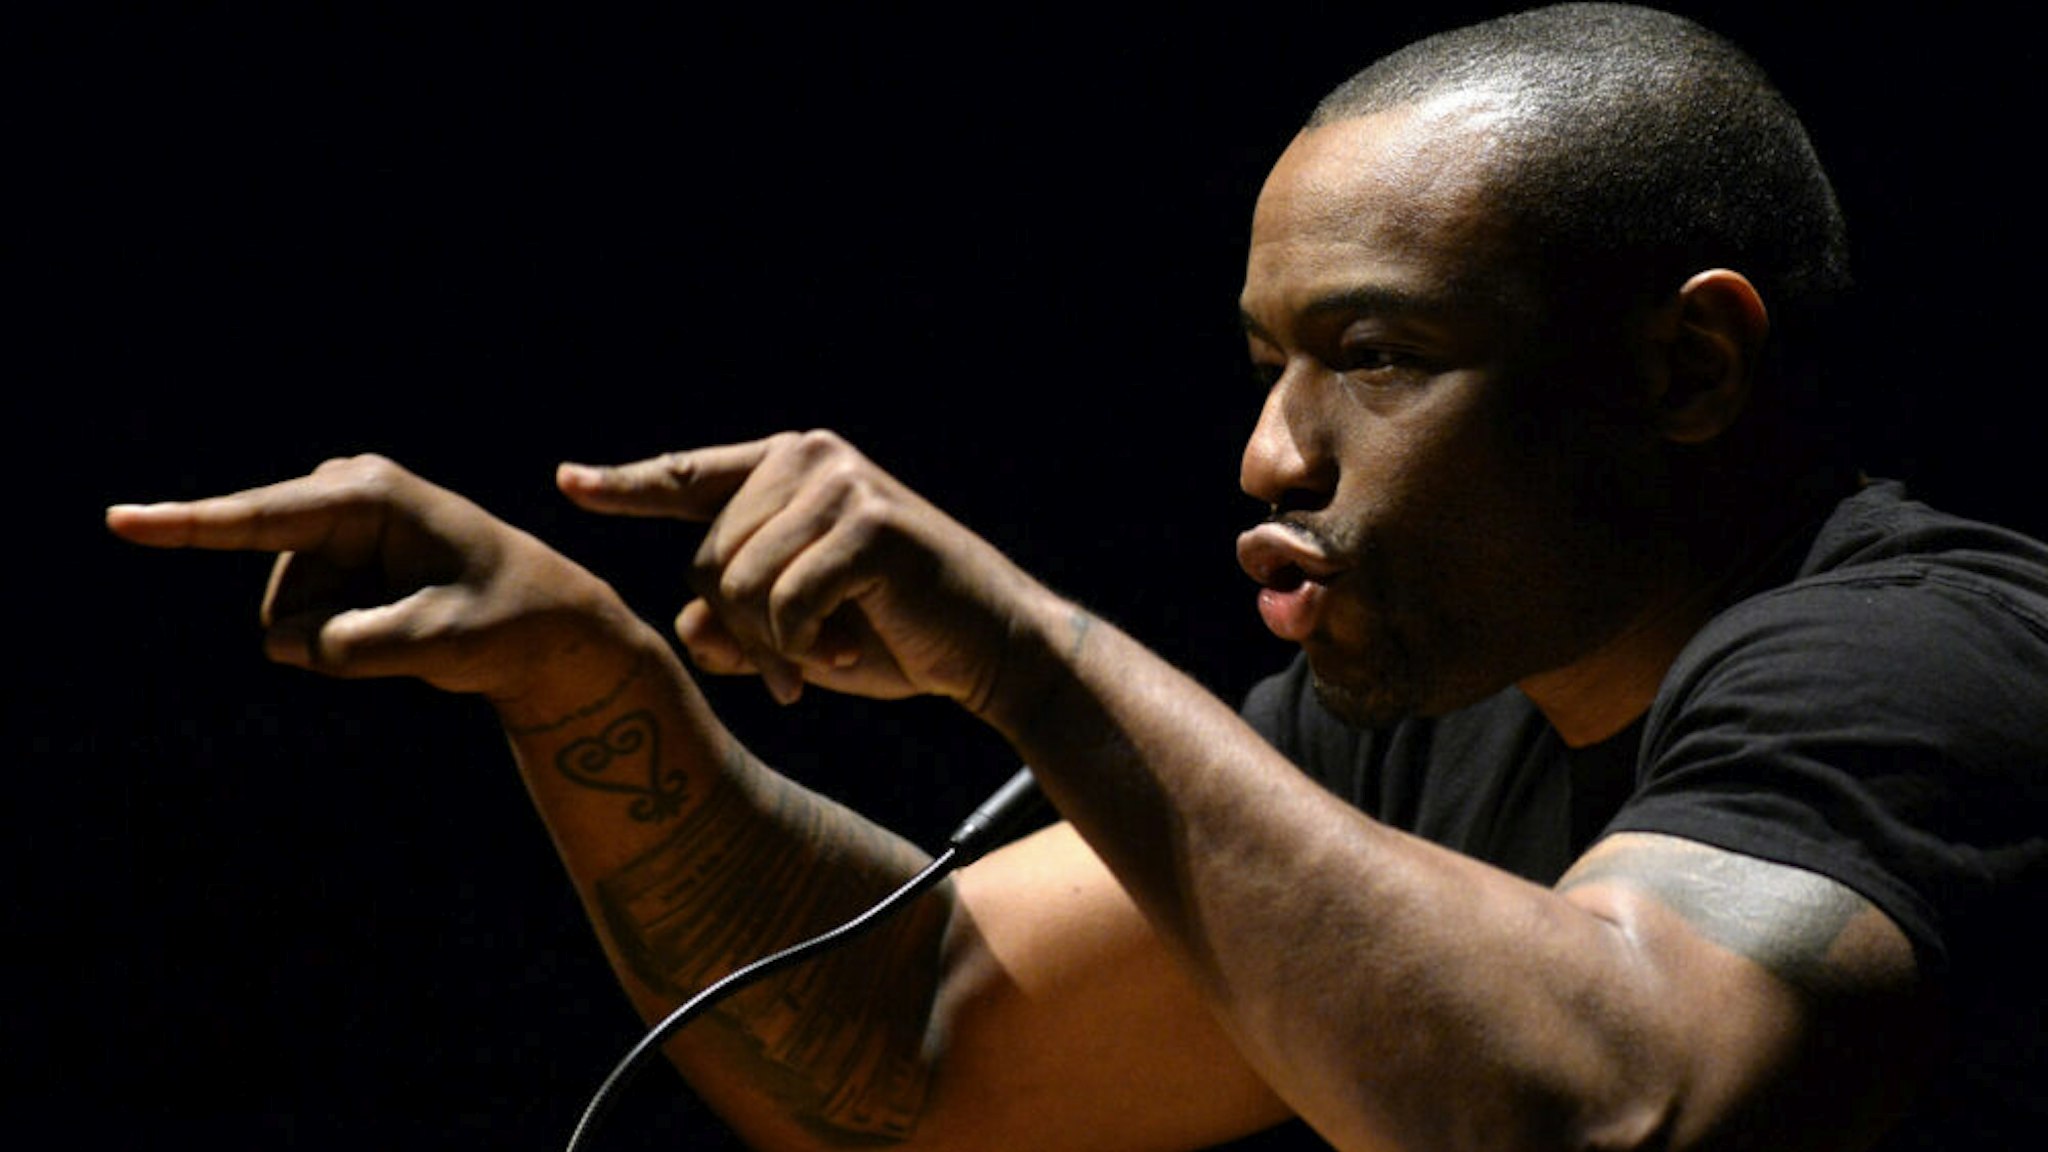 AMHERST, MA - MAY 4: Marc Lamont Hill speaks during a panel on free speech and the Israeli-Palestinian conflict at the University of Massachusetts campus in Amherst, Massachusetts on May 4, 2019.